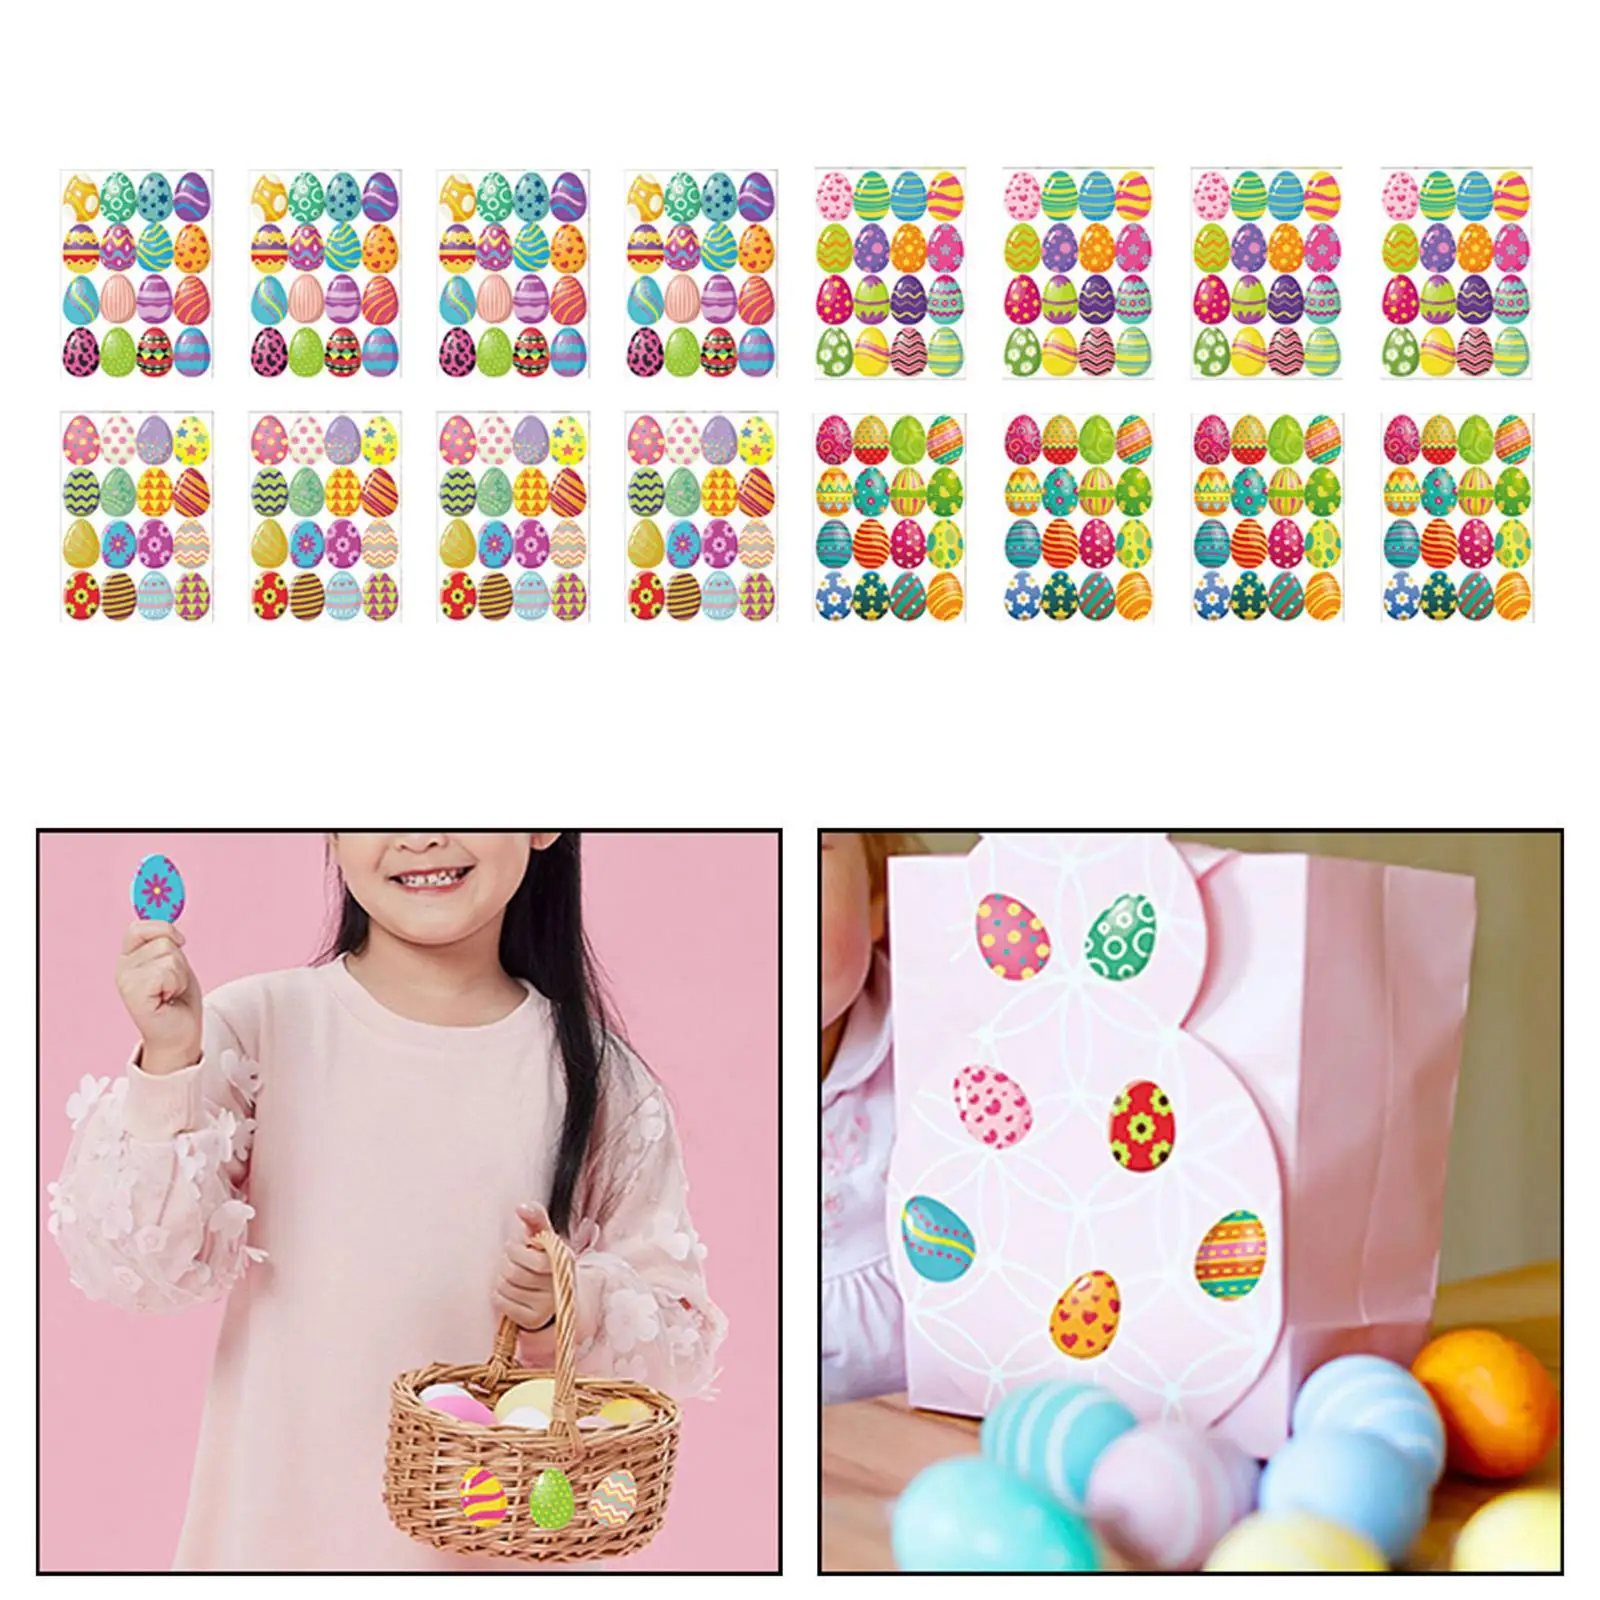 Cartoon Easter Eggs Theme Sticker Self Adhesive Decorative Stickers 256Pcs for Party Supplies Scrapbooks Card Baking DIY Crafts